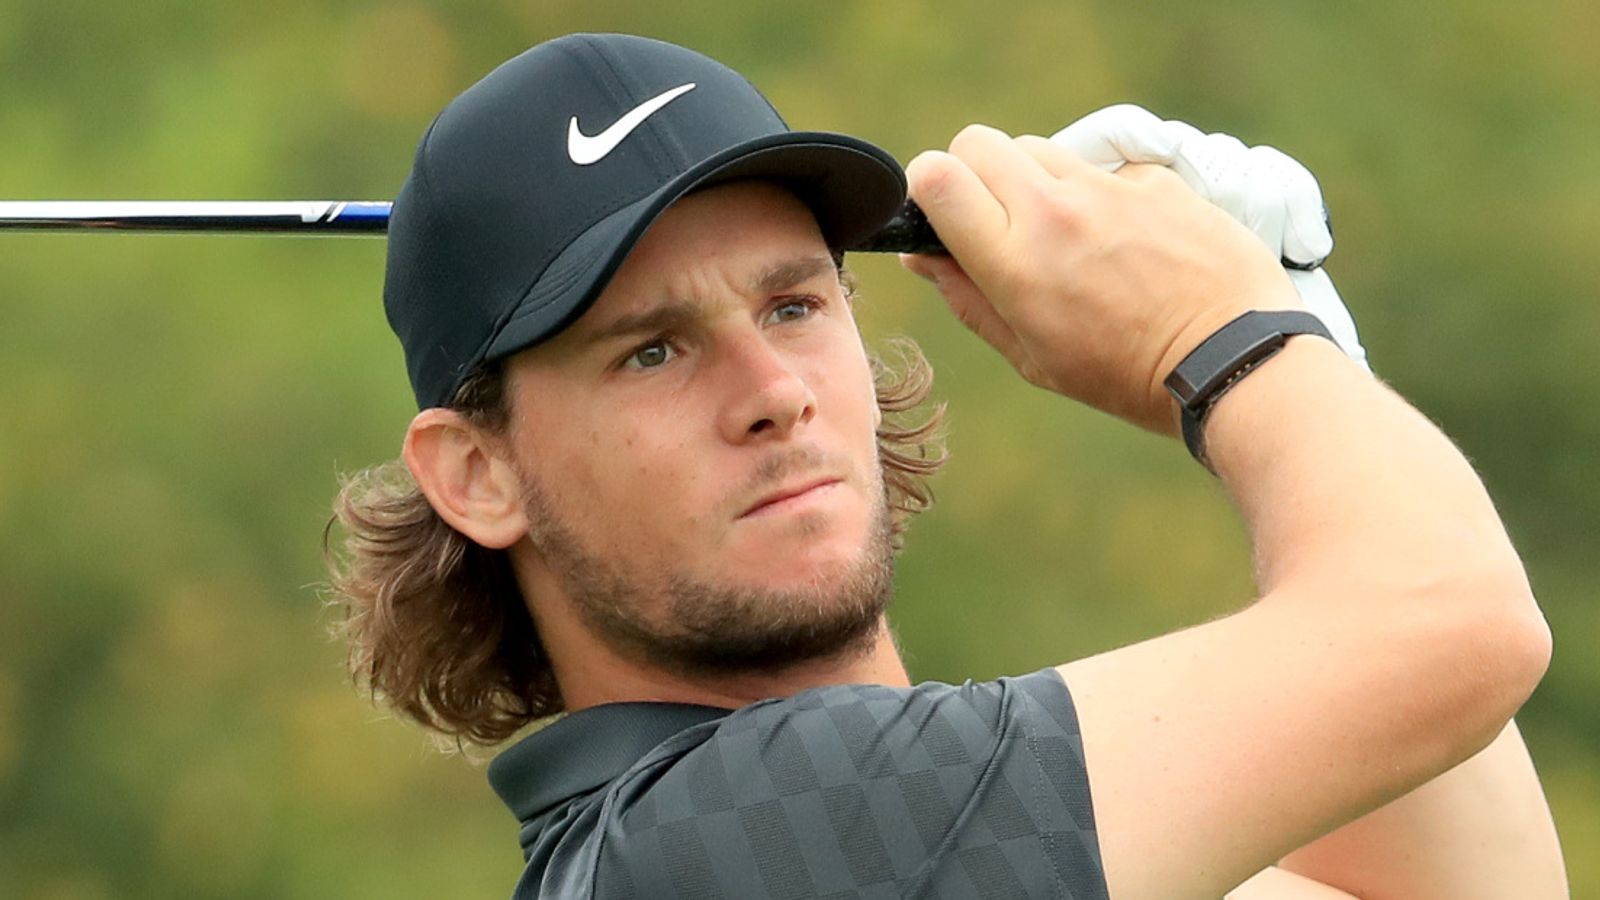 Celtic Classic: Thomas Pieters leads despite having no competitive golf in five months | Golf